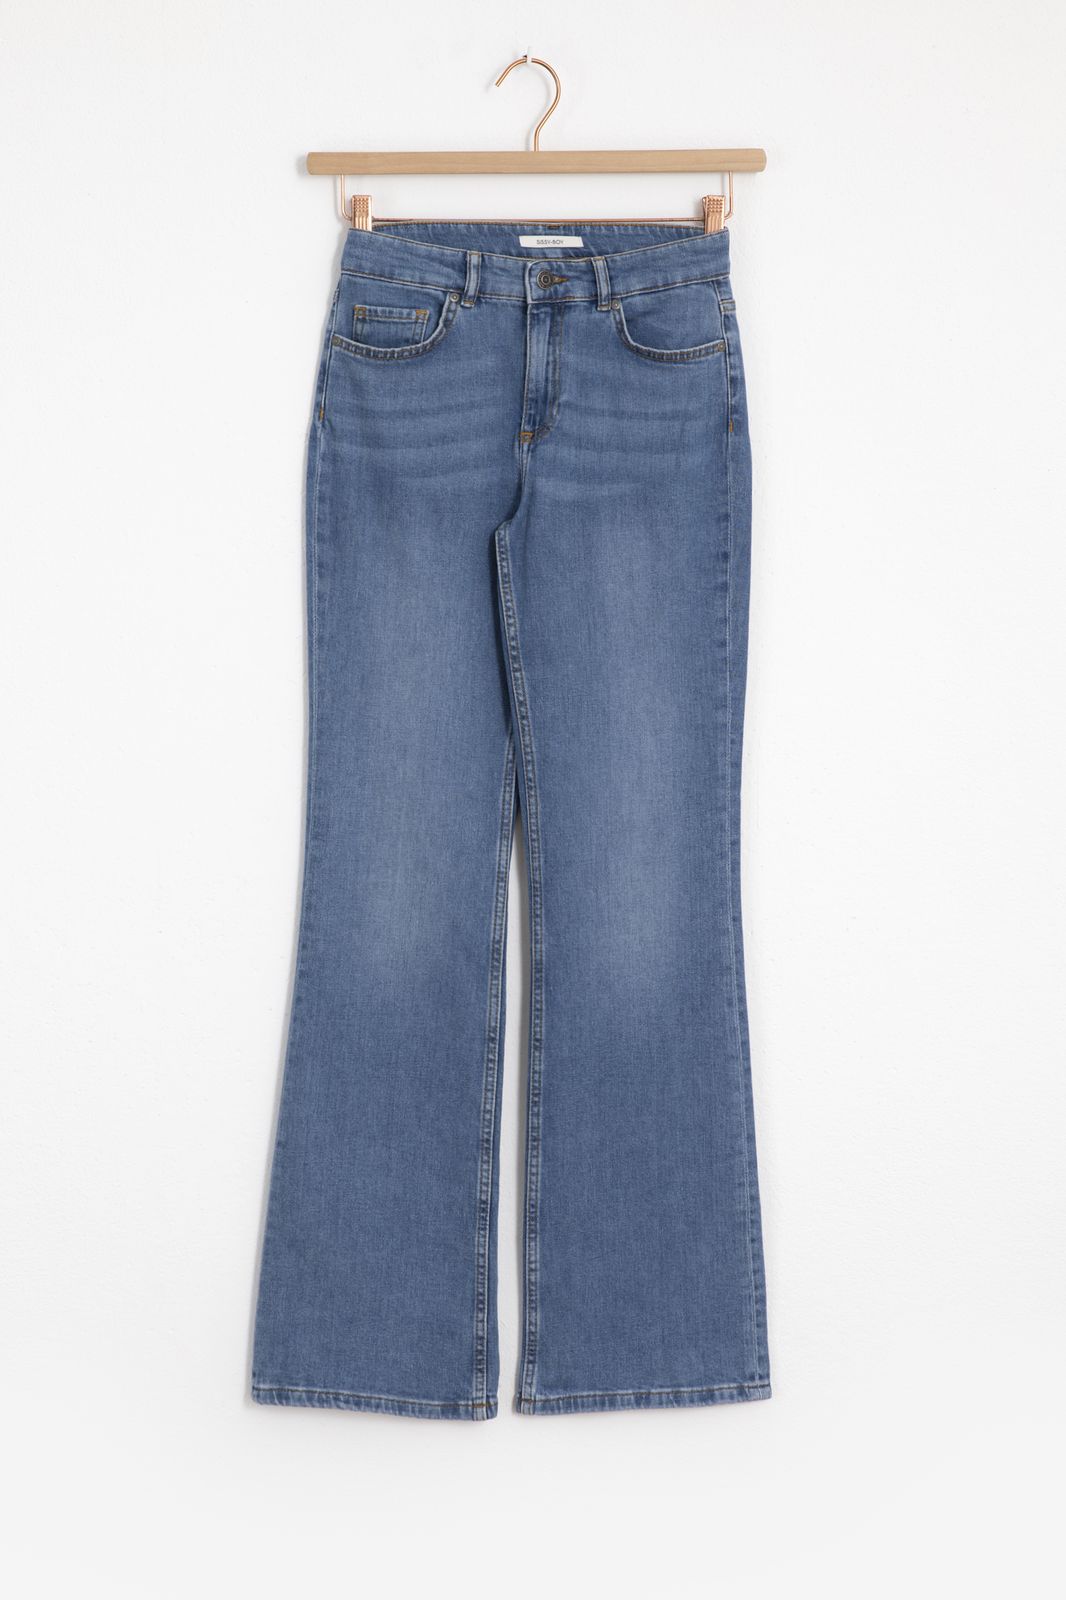 Baltimore washed blue mid waist bootcut jeans